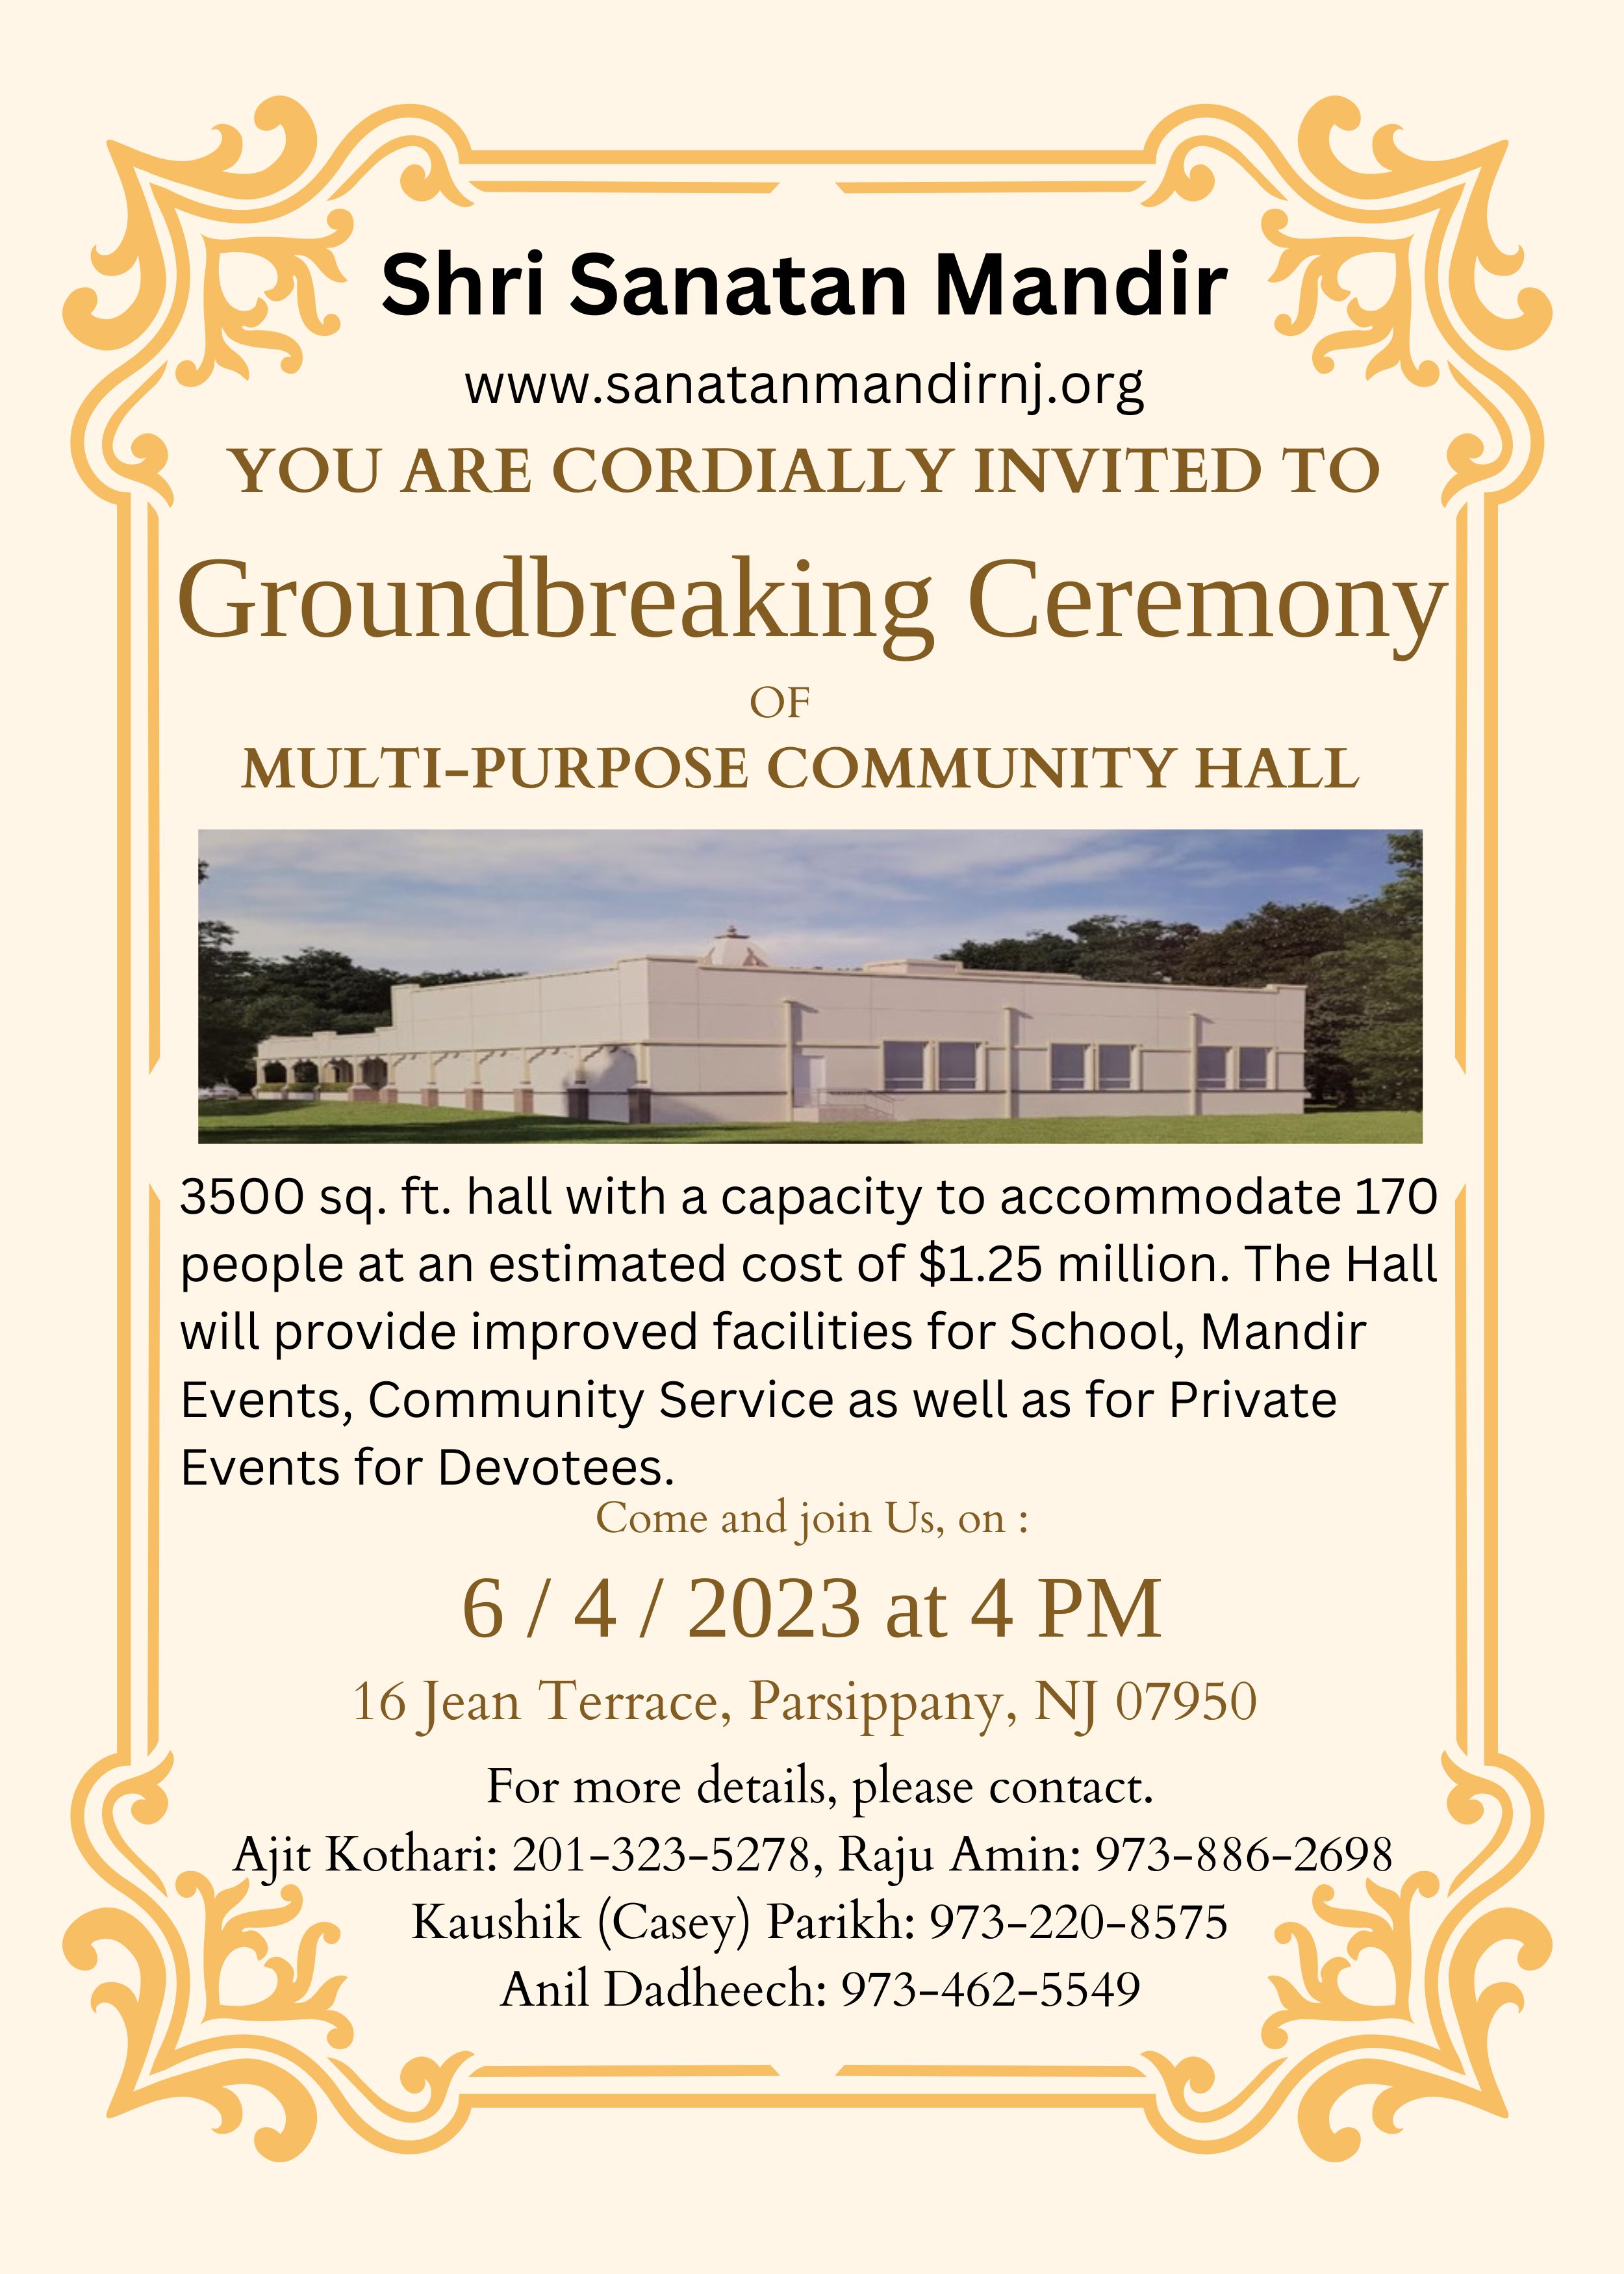 Groundbreaking Ceremony for the Multipurpose Community Hall on June 4th, 2023